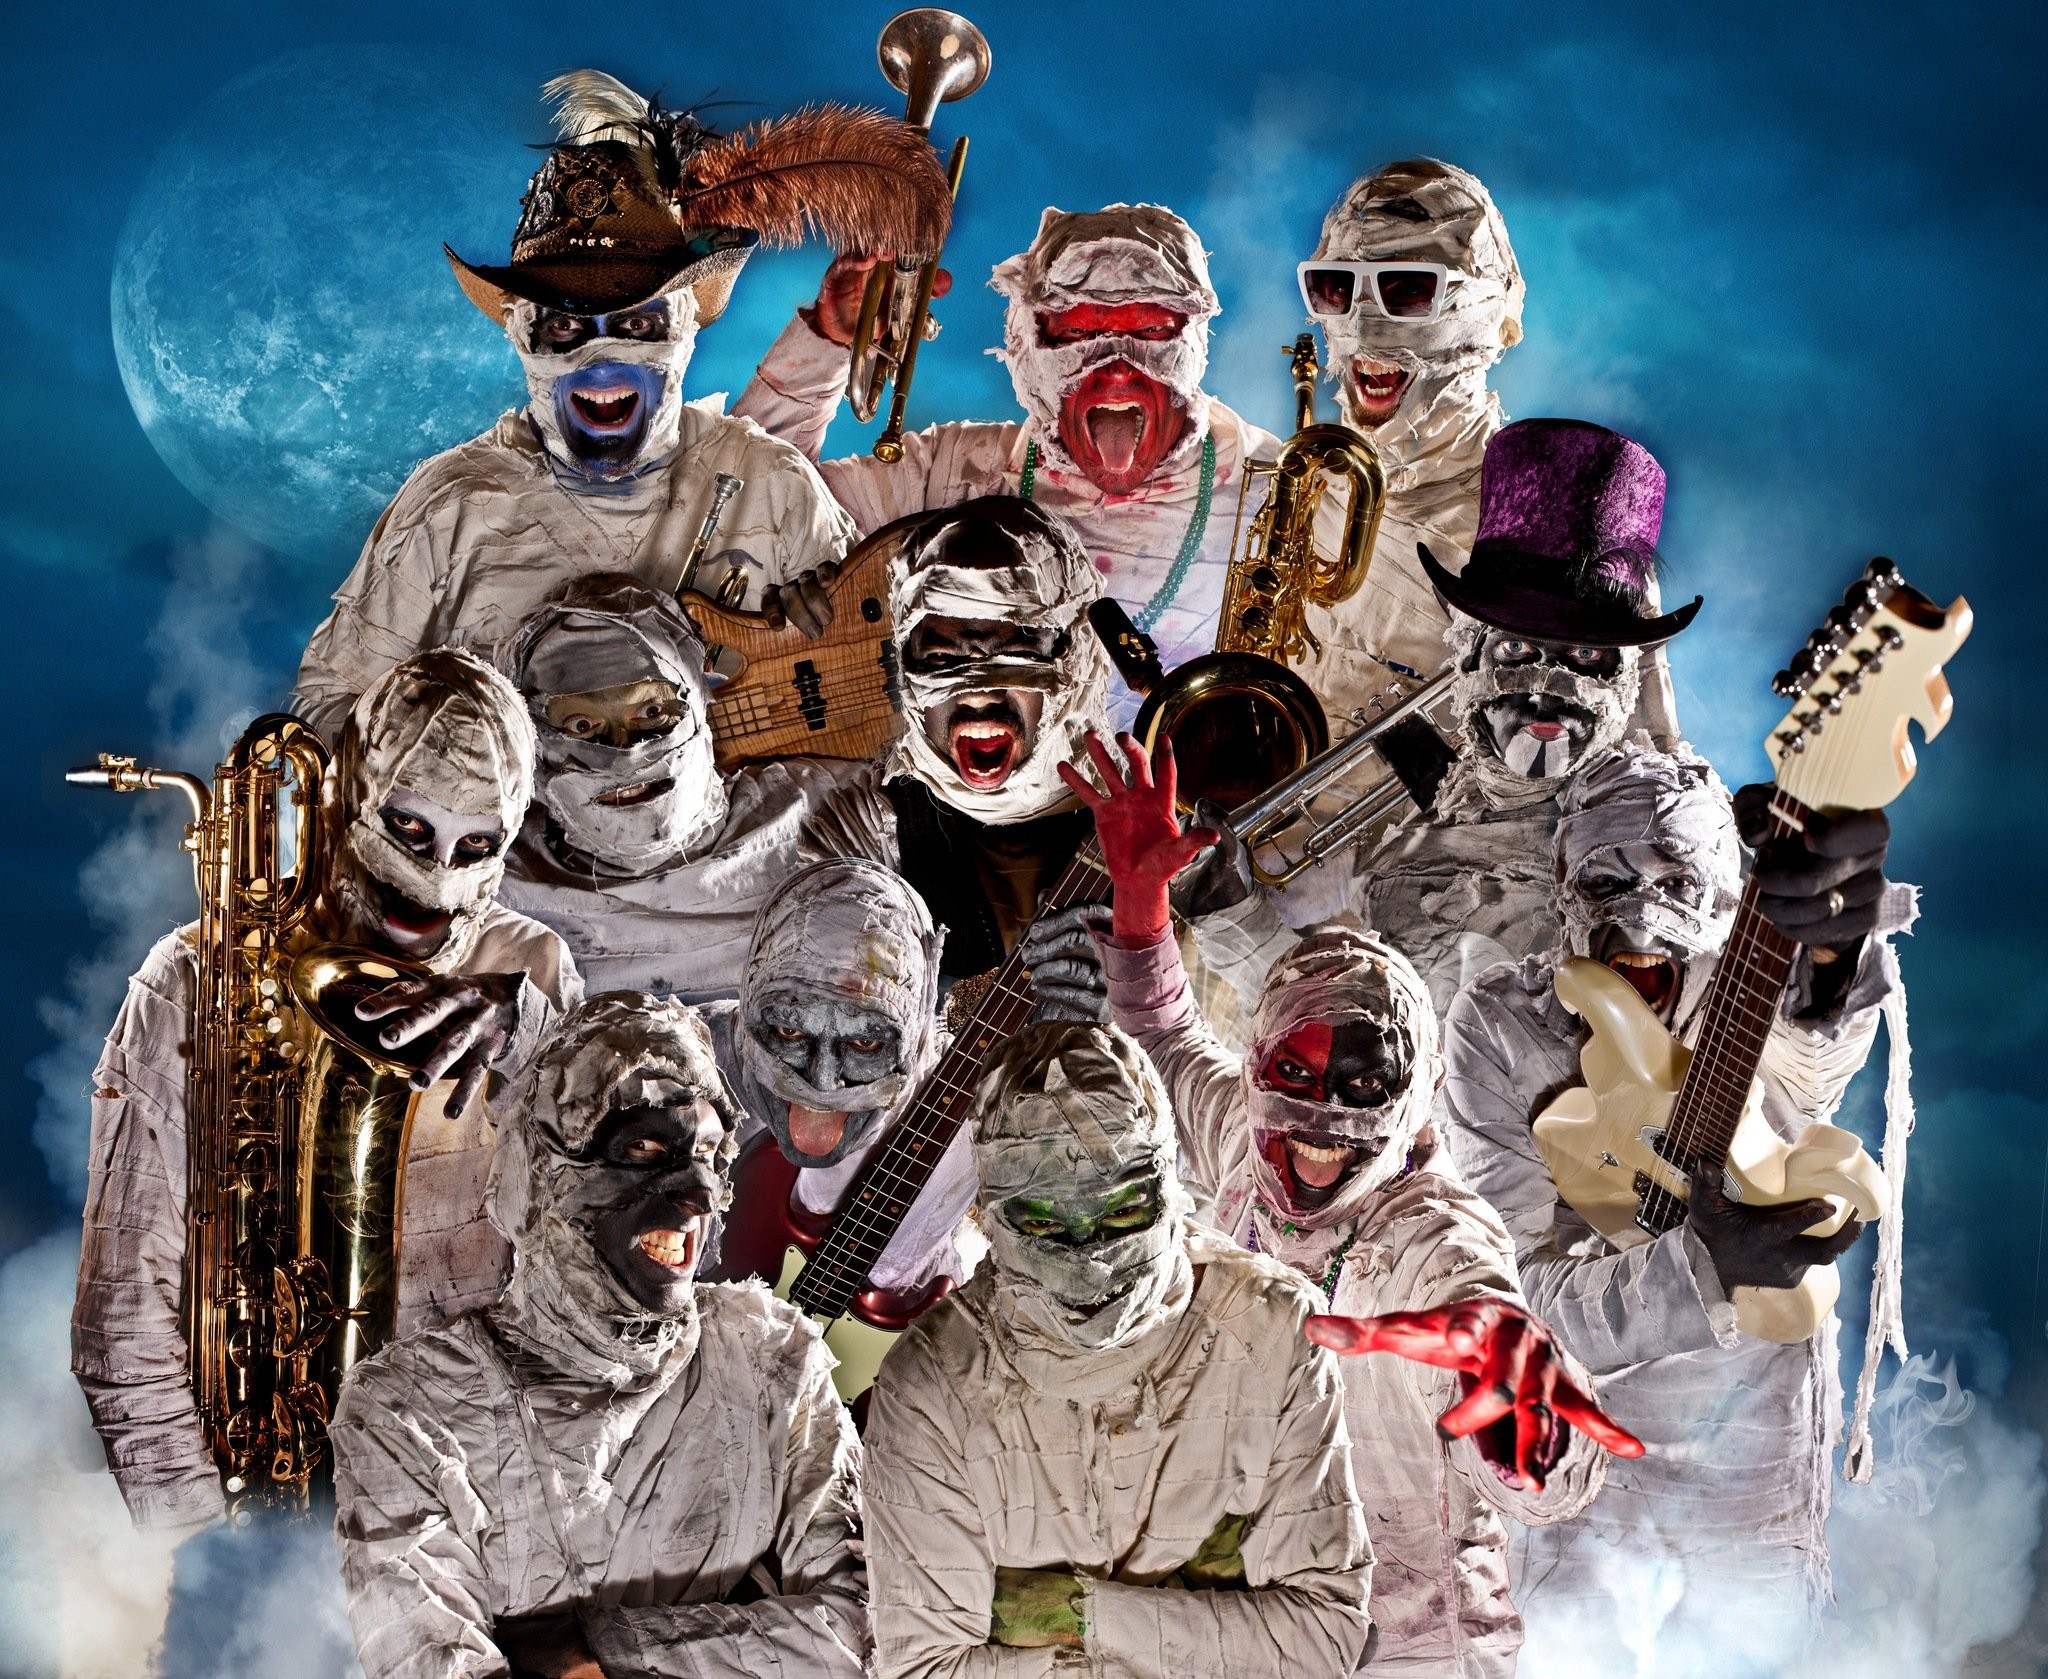 Here Come the Mummies at Uptown Theater